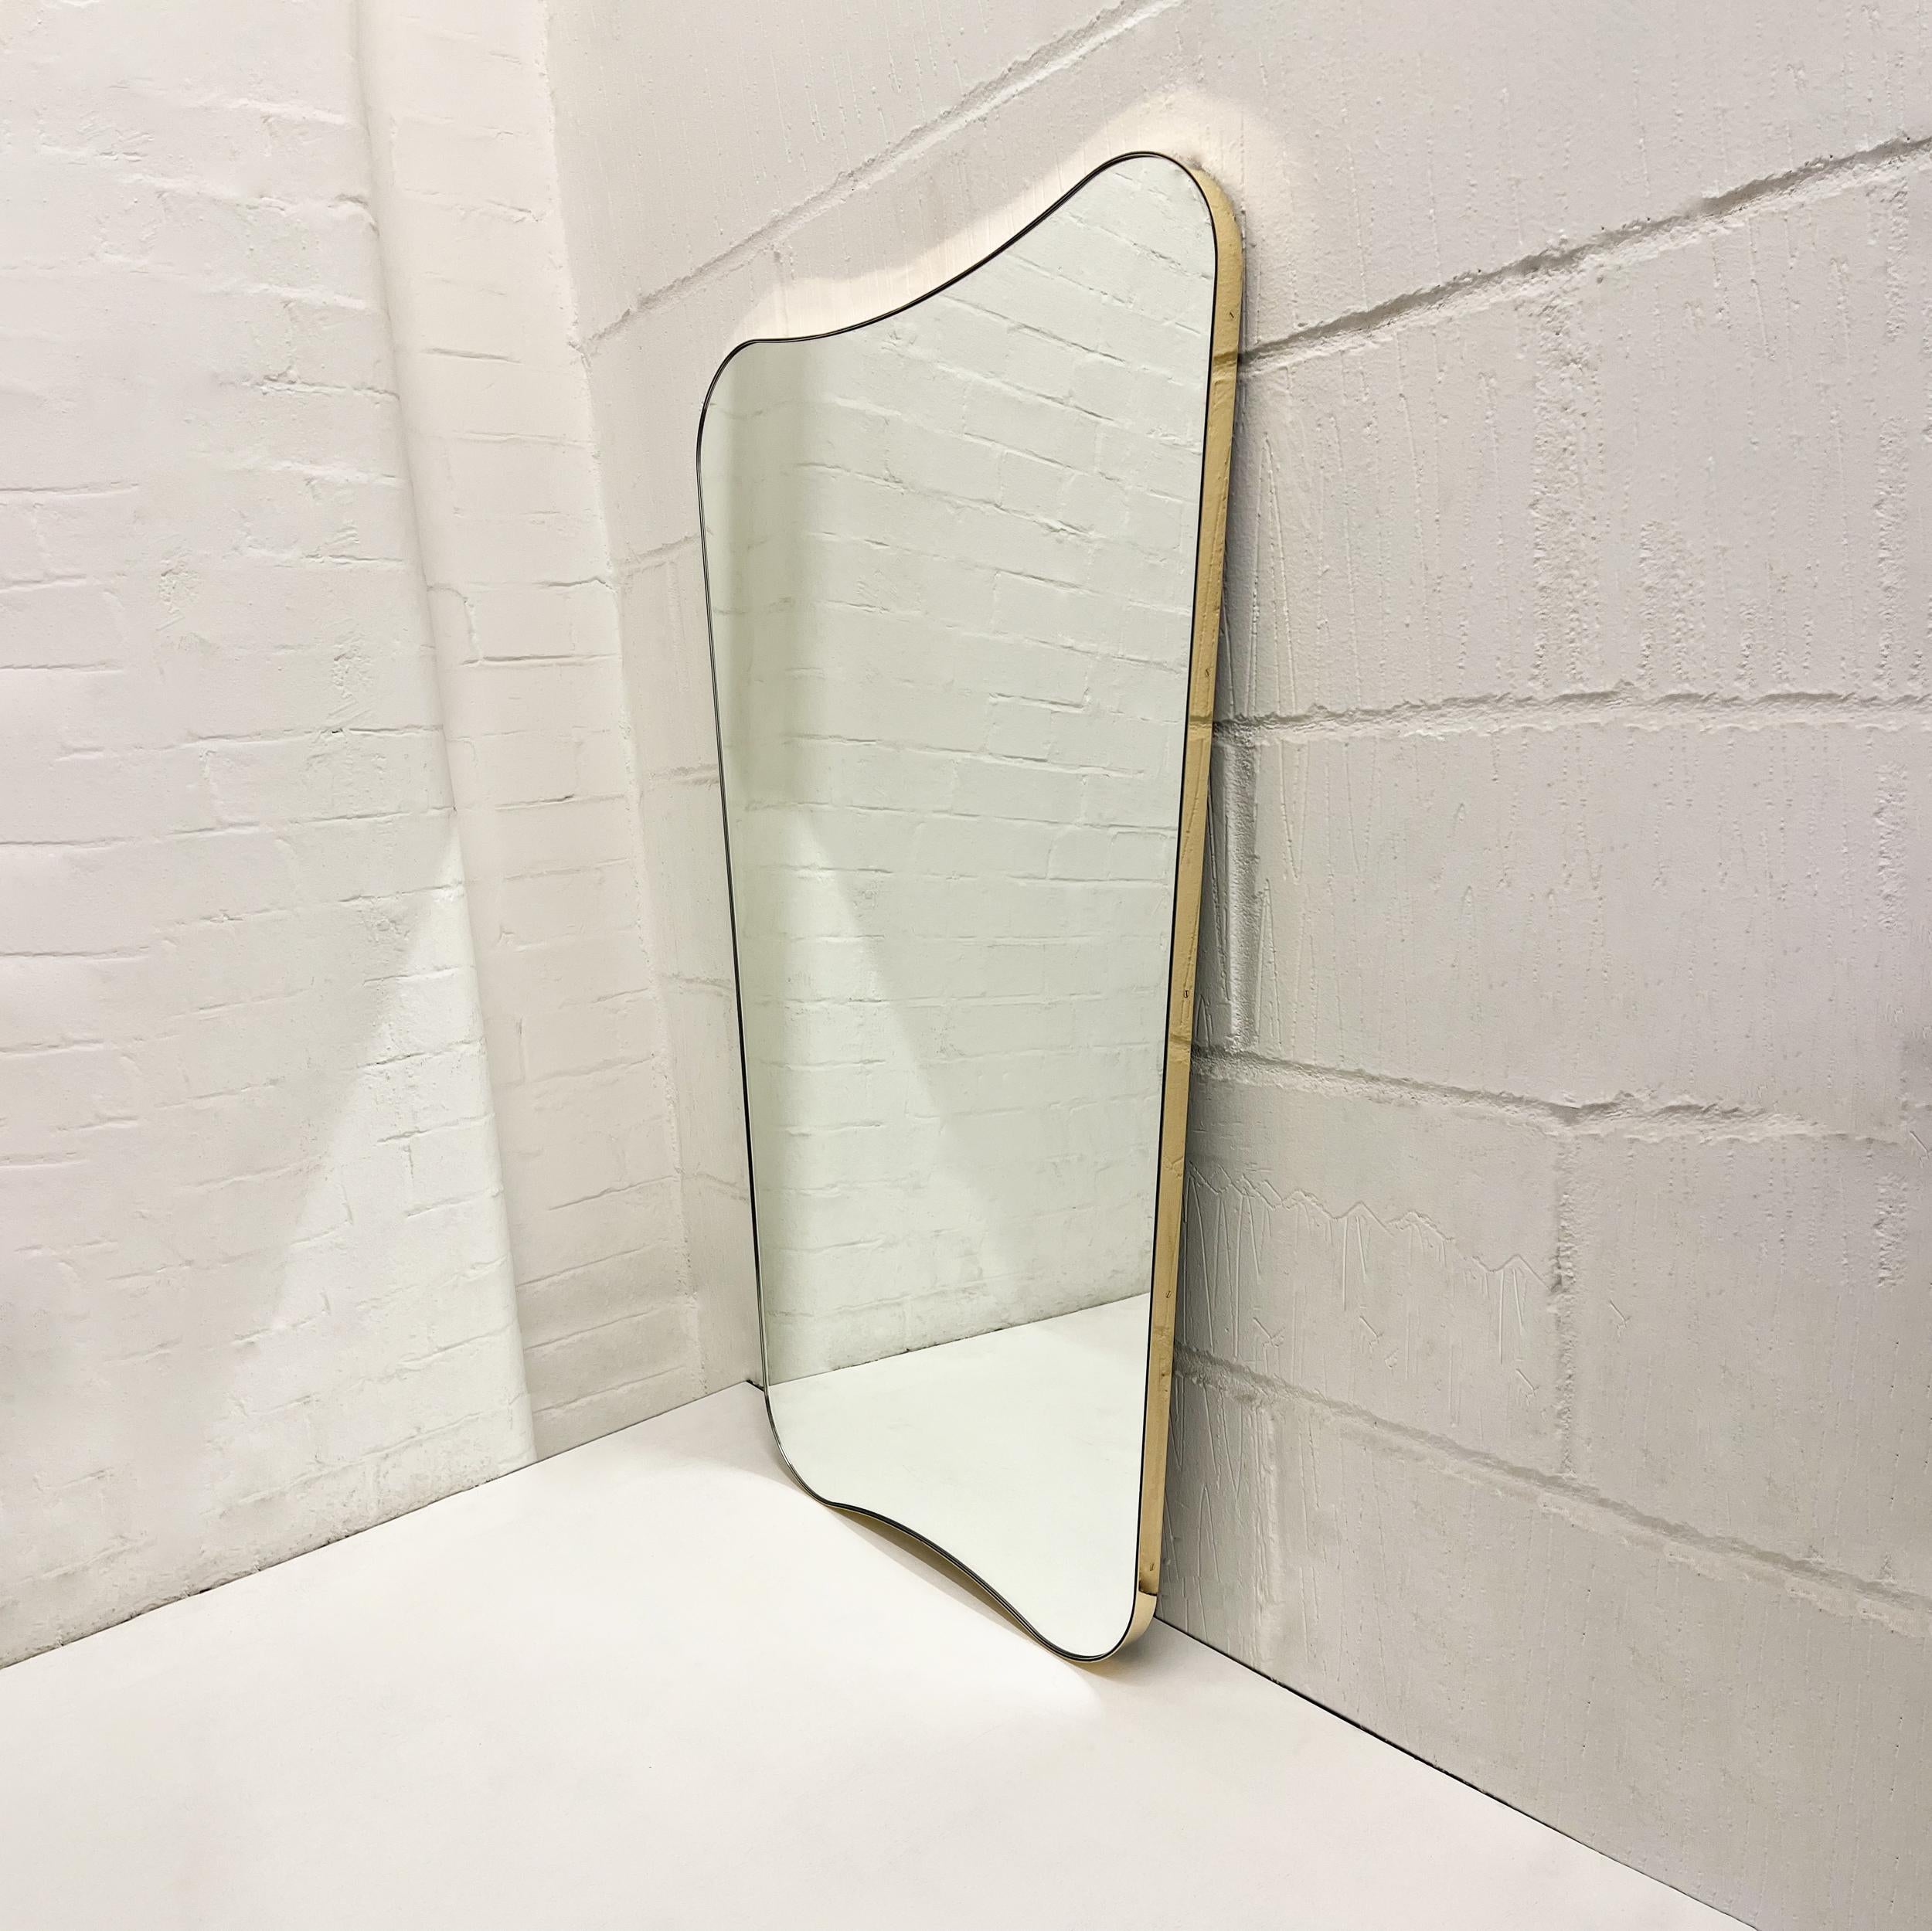 Elegant mid century style mirror with a minimalist brass frame inspired by the celebrated work of Italian designer Gio Ponti. Handcrafted in London, UK, to very high quality standards using pure solid brass.

Mirror dimensions: H 107cm x W 62cm x D